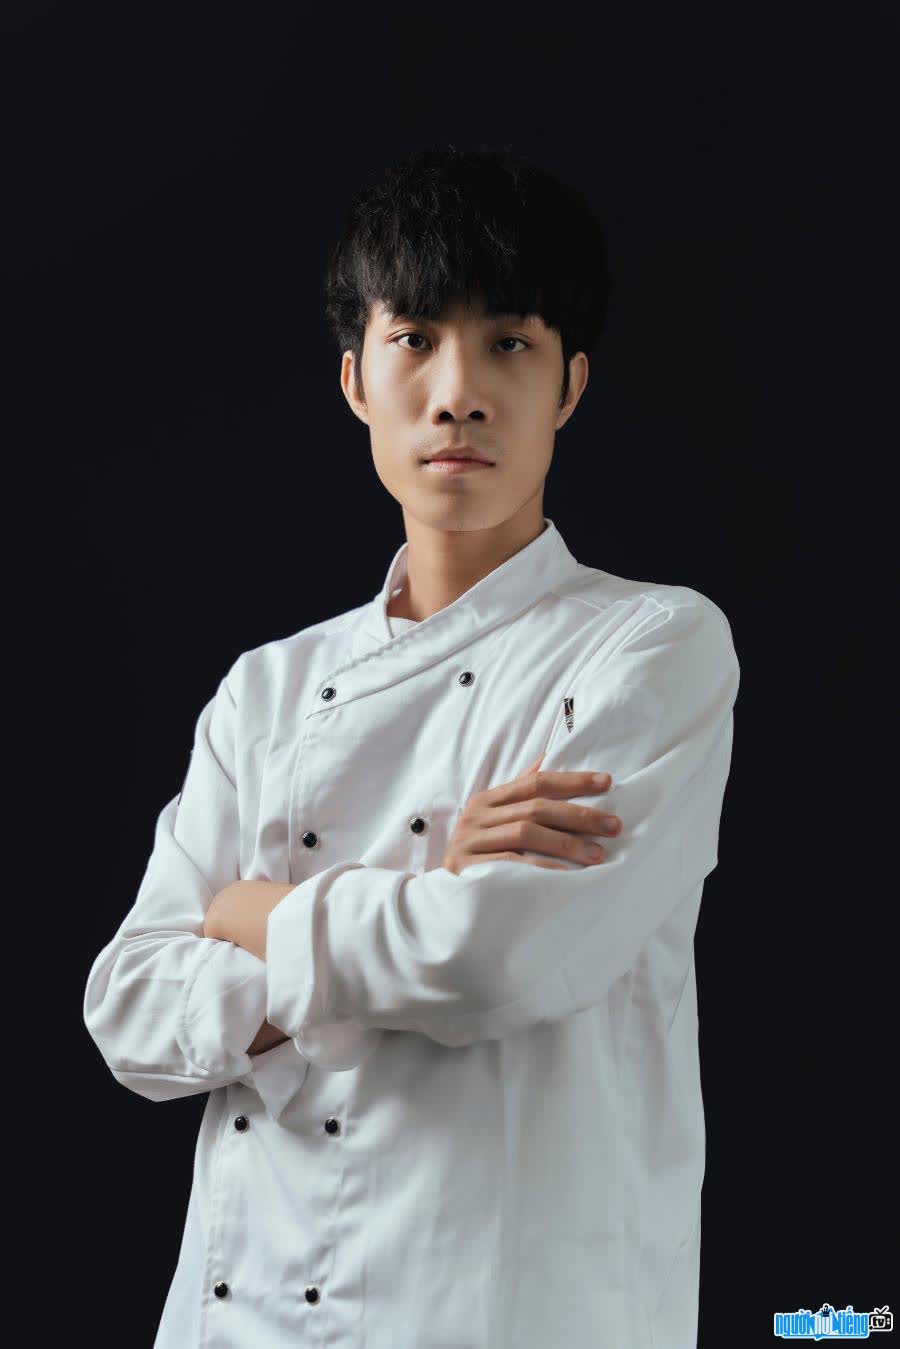  Le Minh Hieu - talented young chef